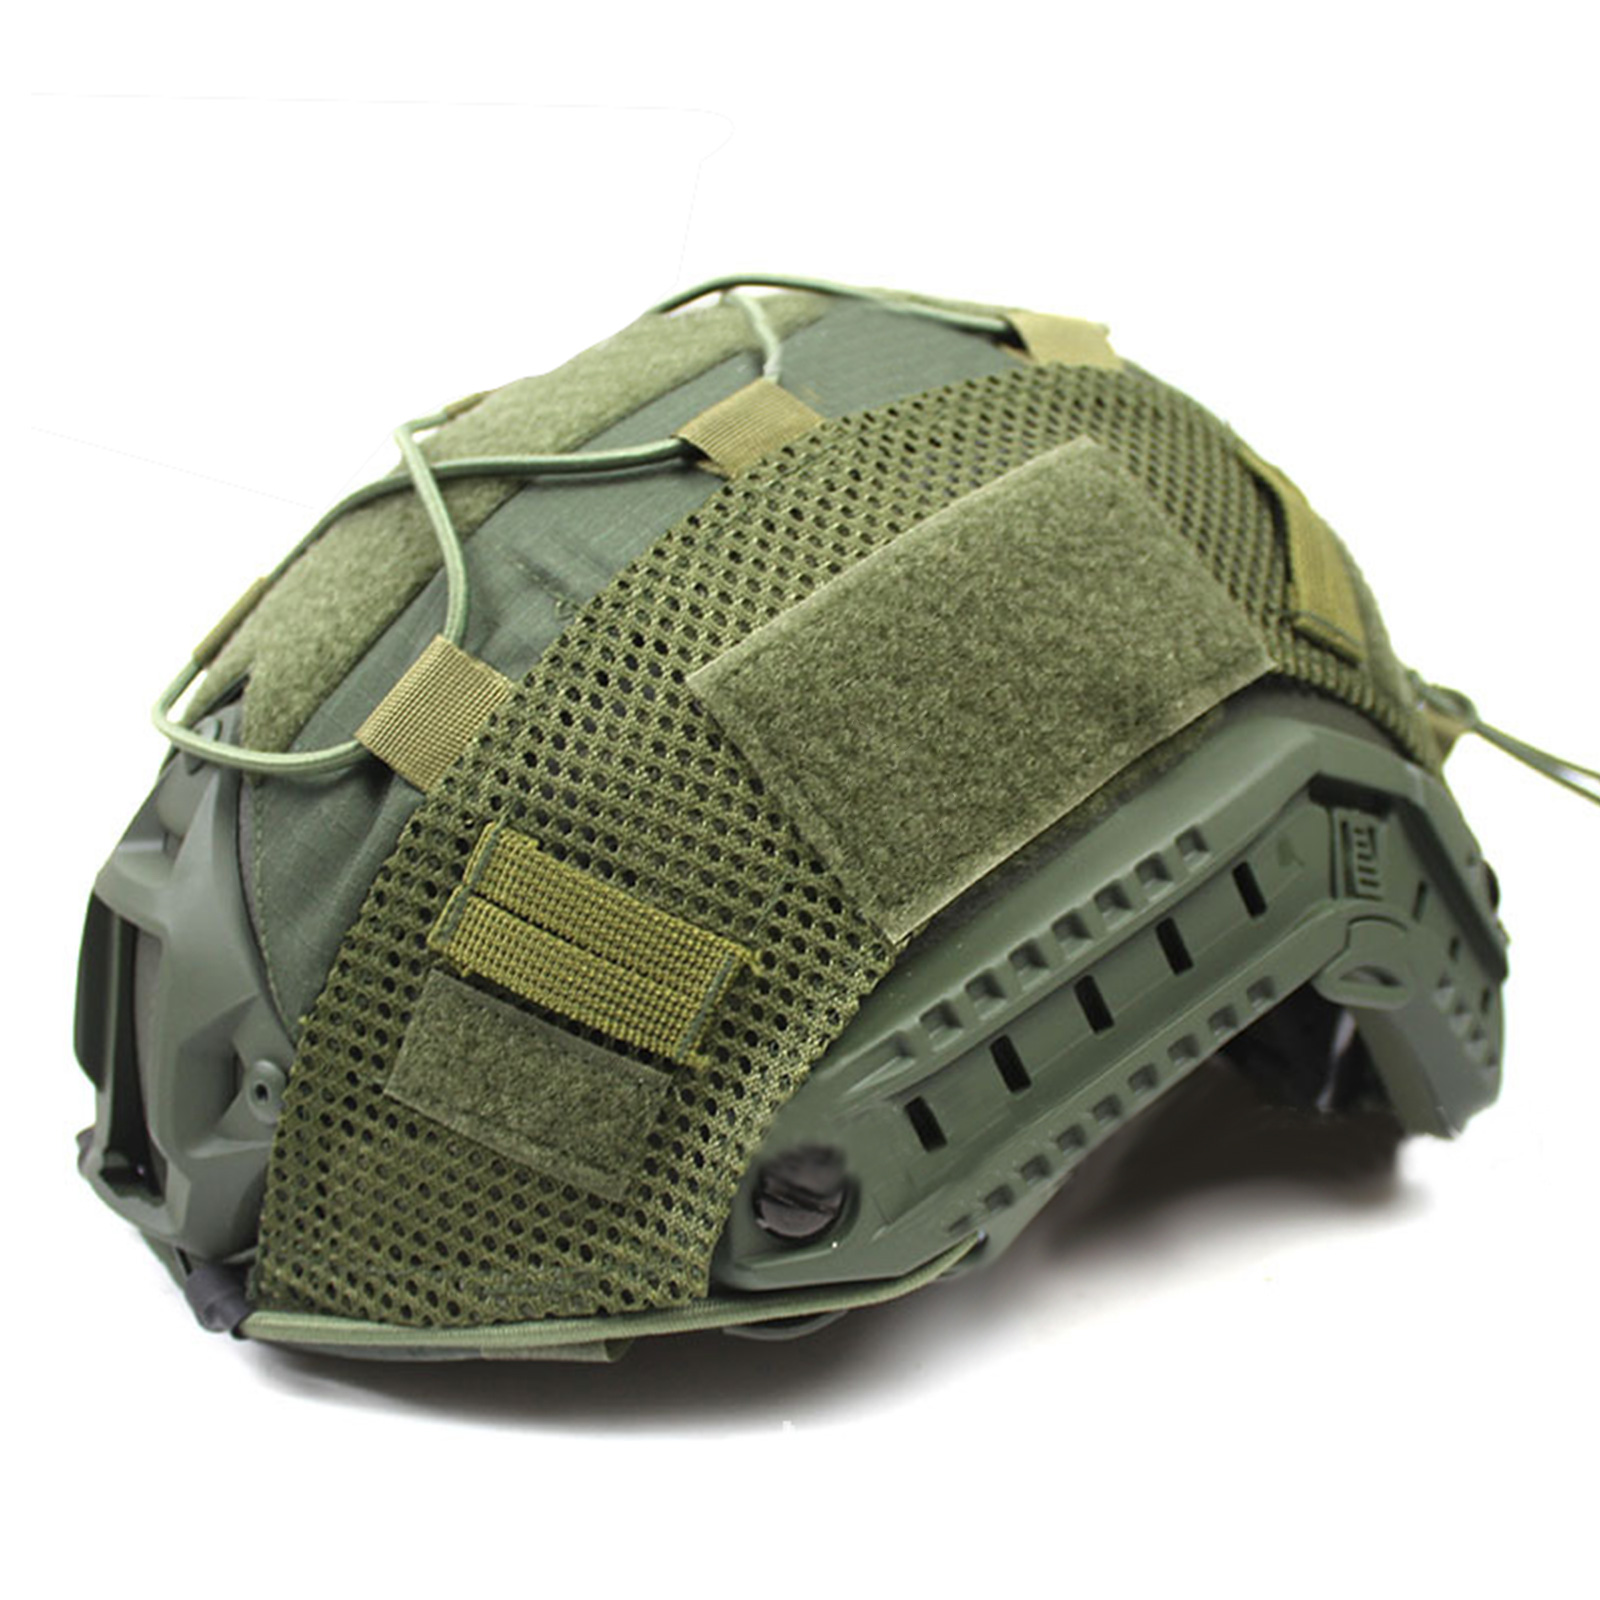 Camouflage Helmet Cover With Quick Adjustable Buckle Airsoft Helmet Case Outdoor Equipment (helmet Not Included) A4